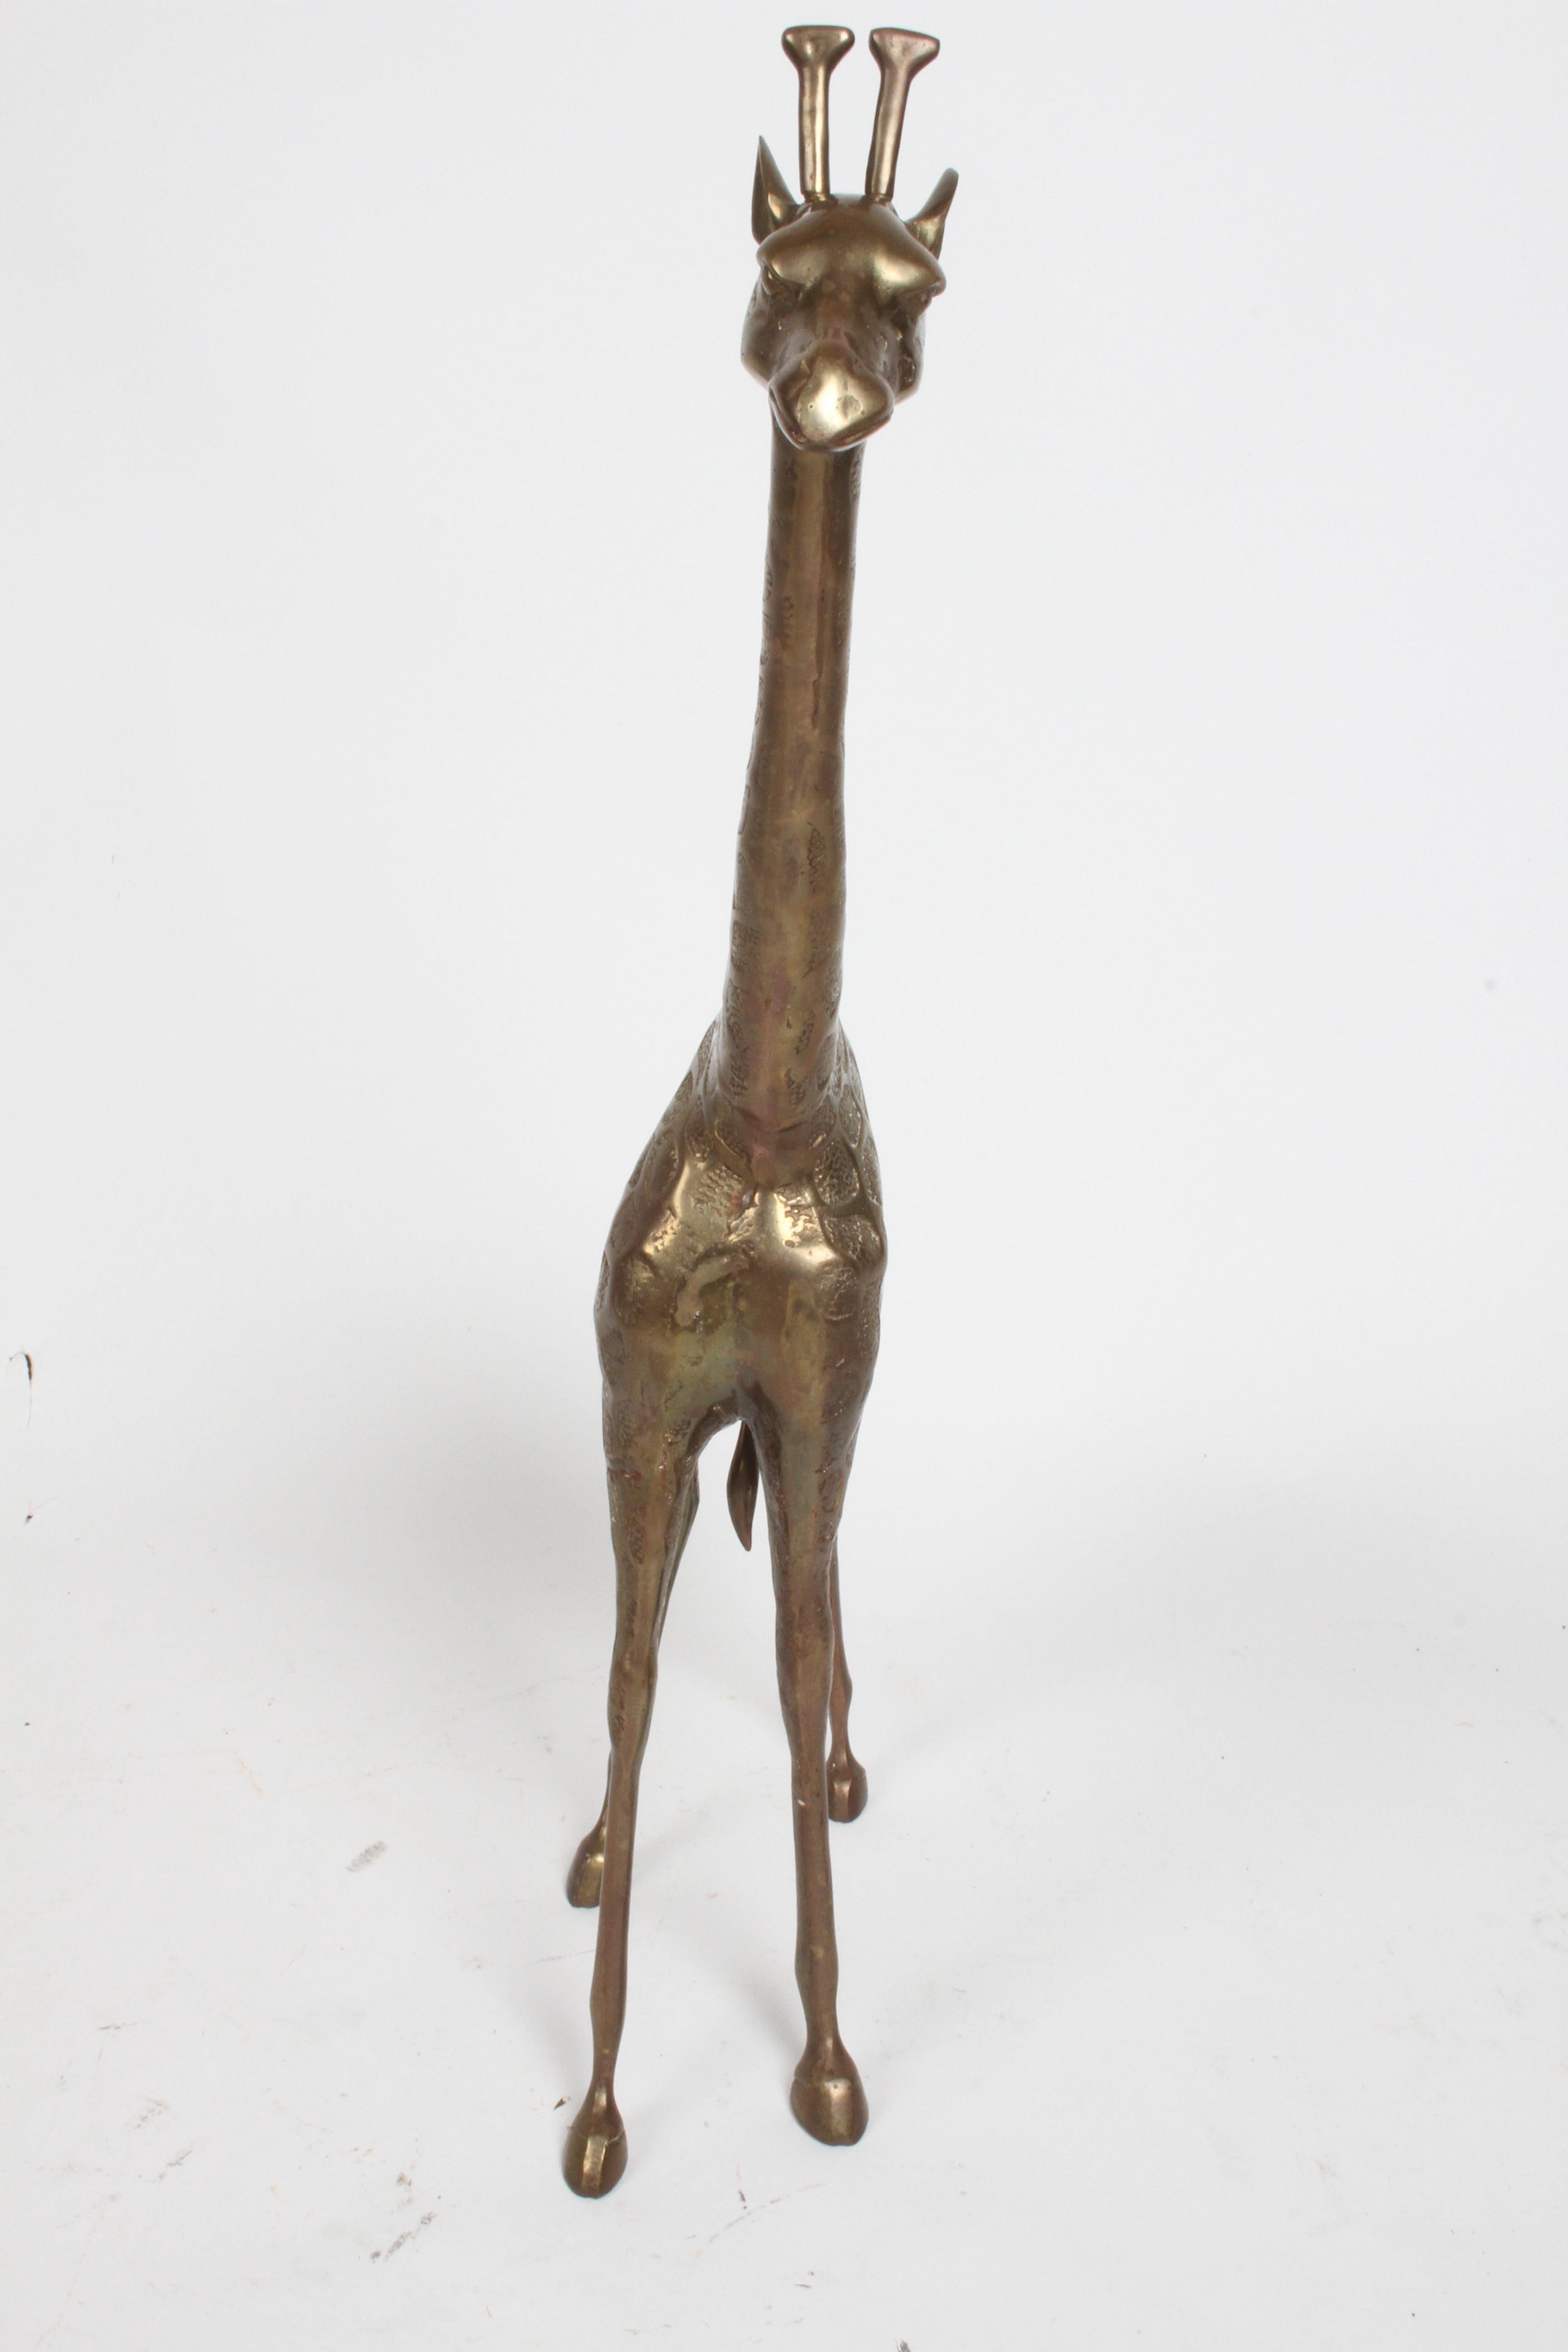 Hollywood Regency Style Brass Giraffe Floor Statue or Sculpture, circa 1970s For Sale 7